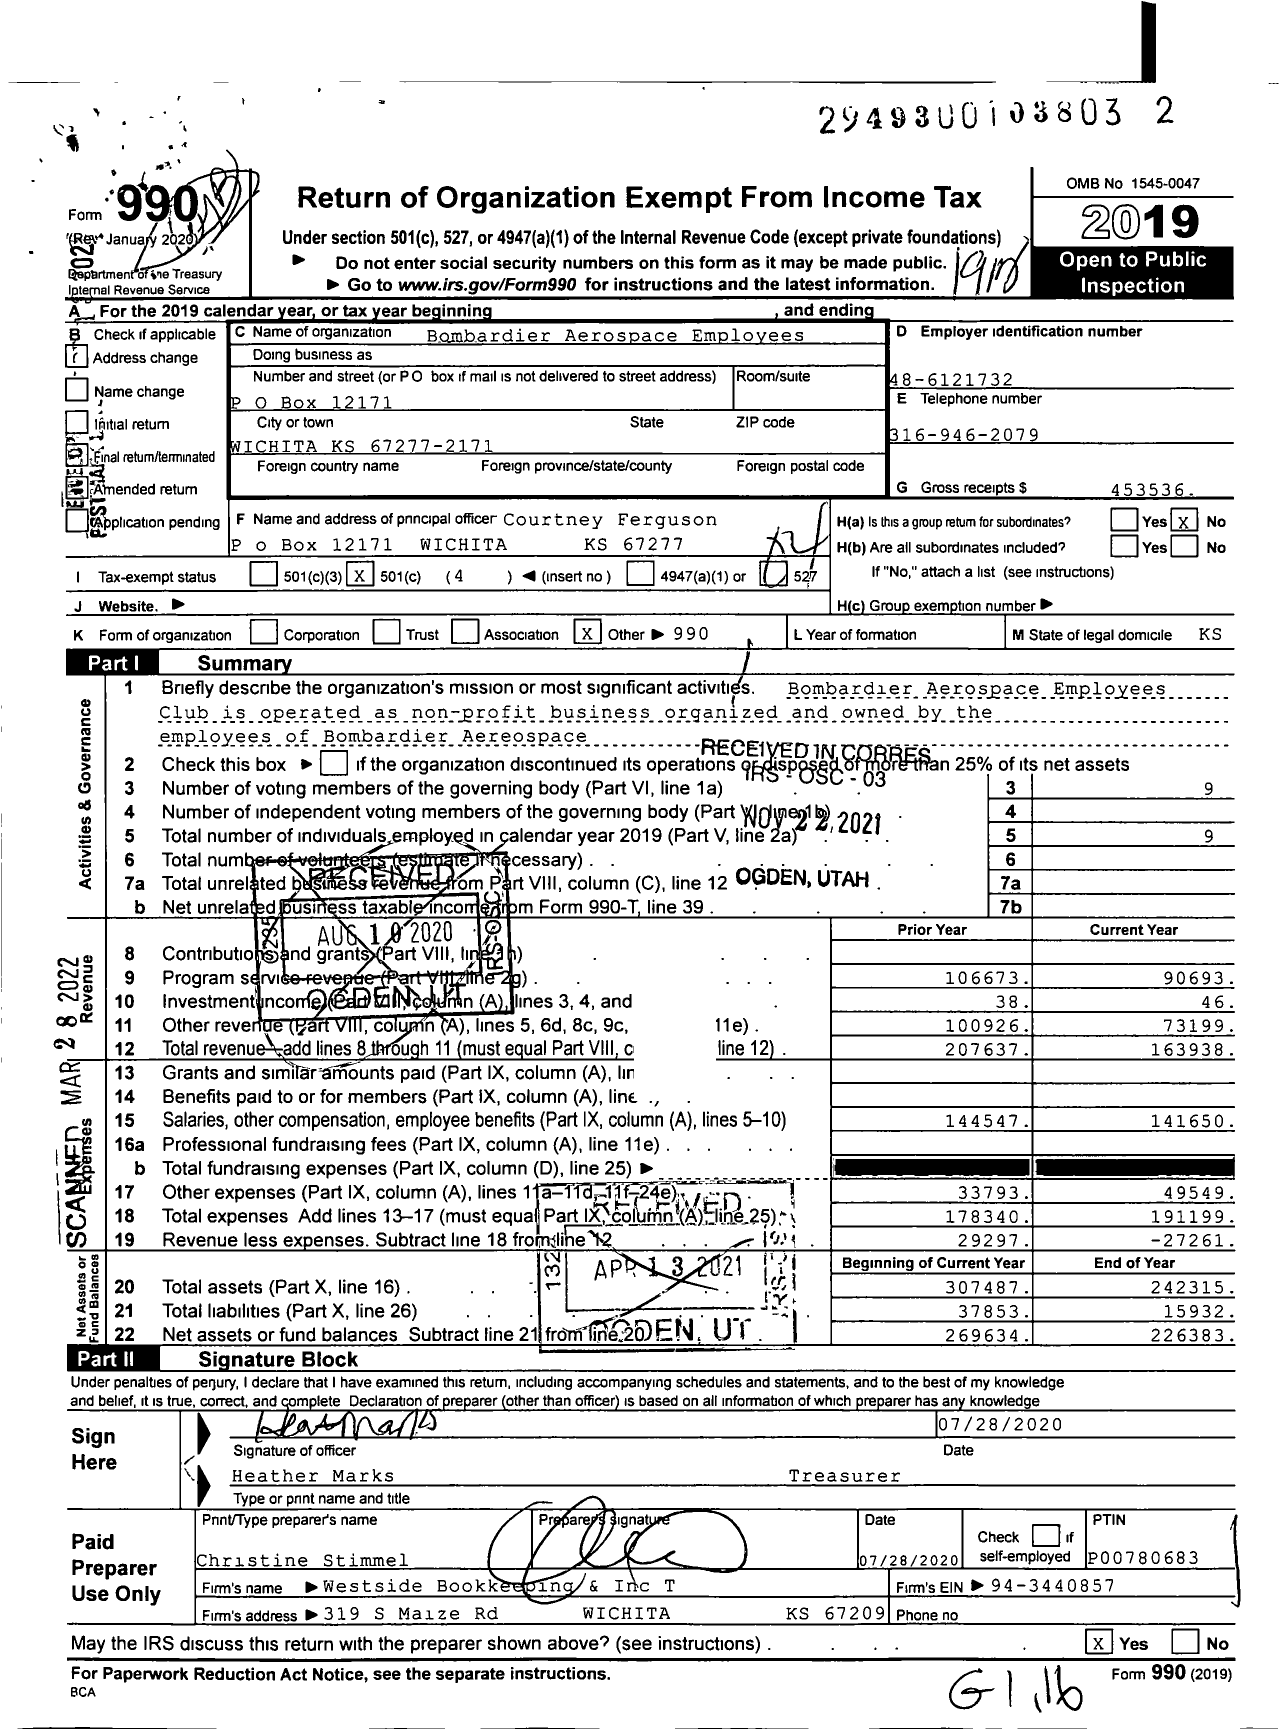 Image of first page of 2019 Form 990O for Bombardier Aerospace Employees